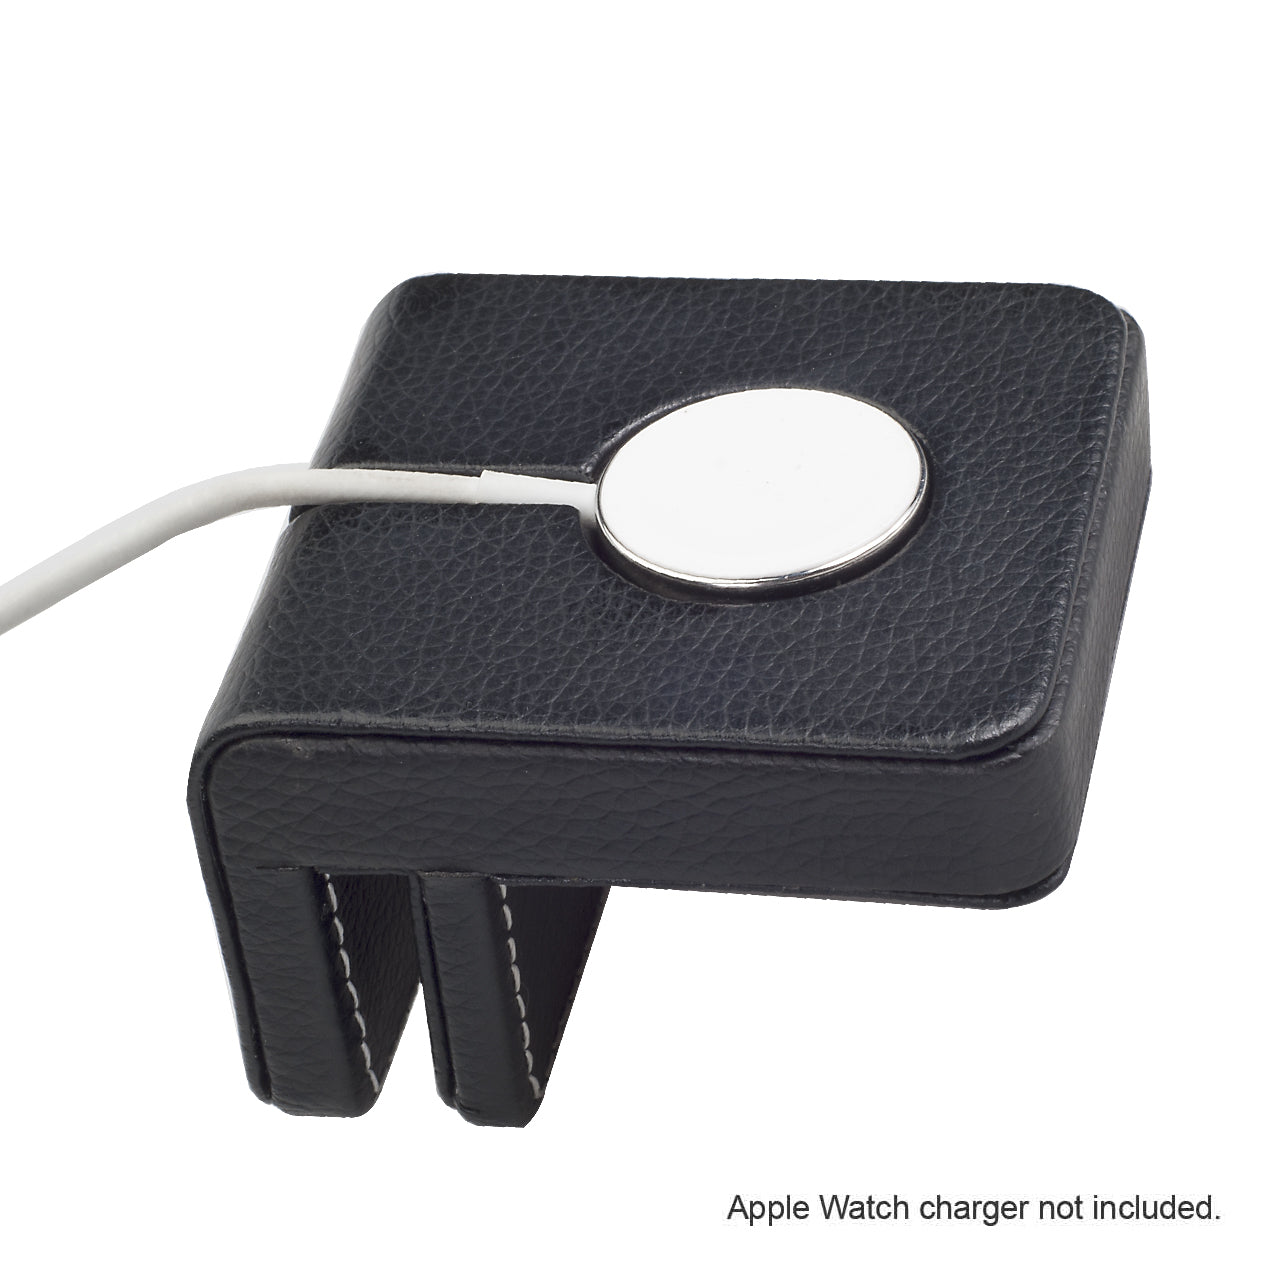 Apple Watch Adapter for Executive Stands and Charging Stations